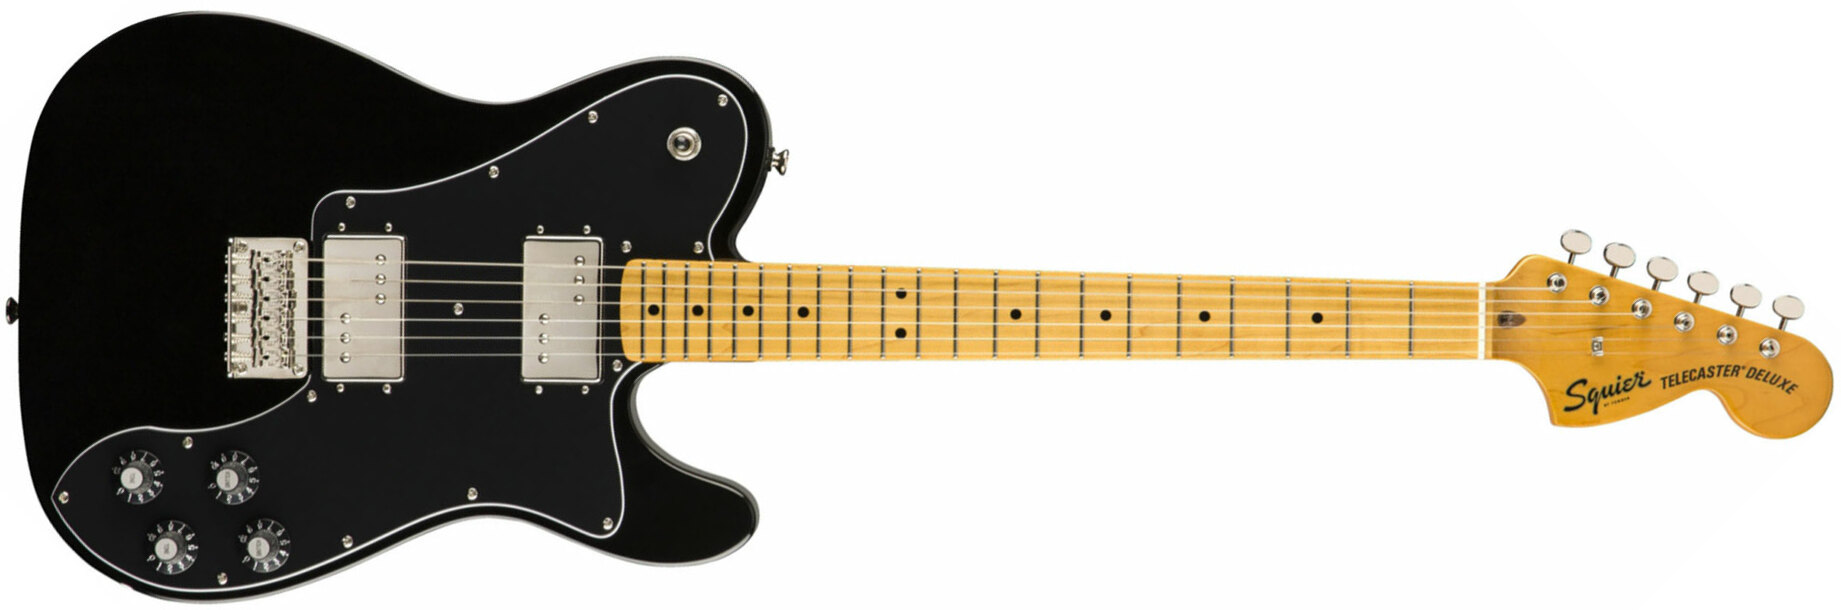 Squier Tele Deluxe Classic Vibe 70s 2019 Hh Mn - Black - Tel shape electric guitar - Main picture